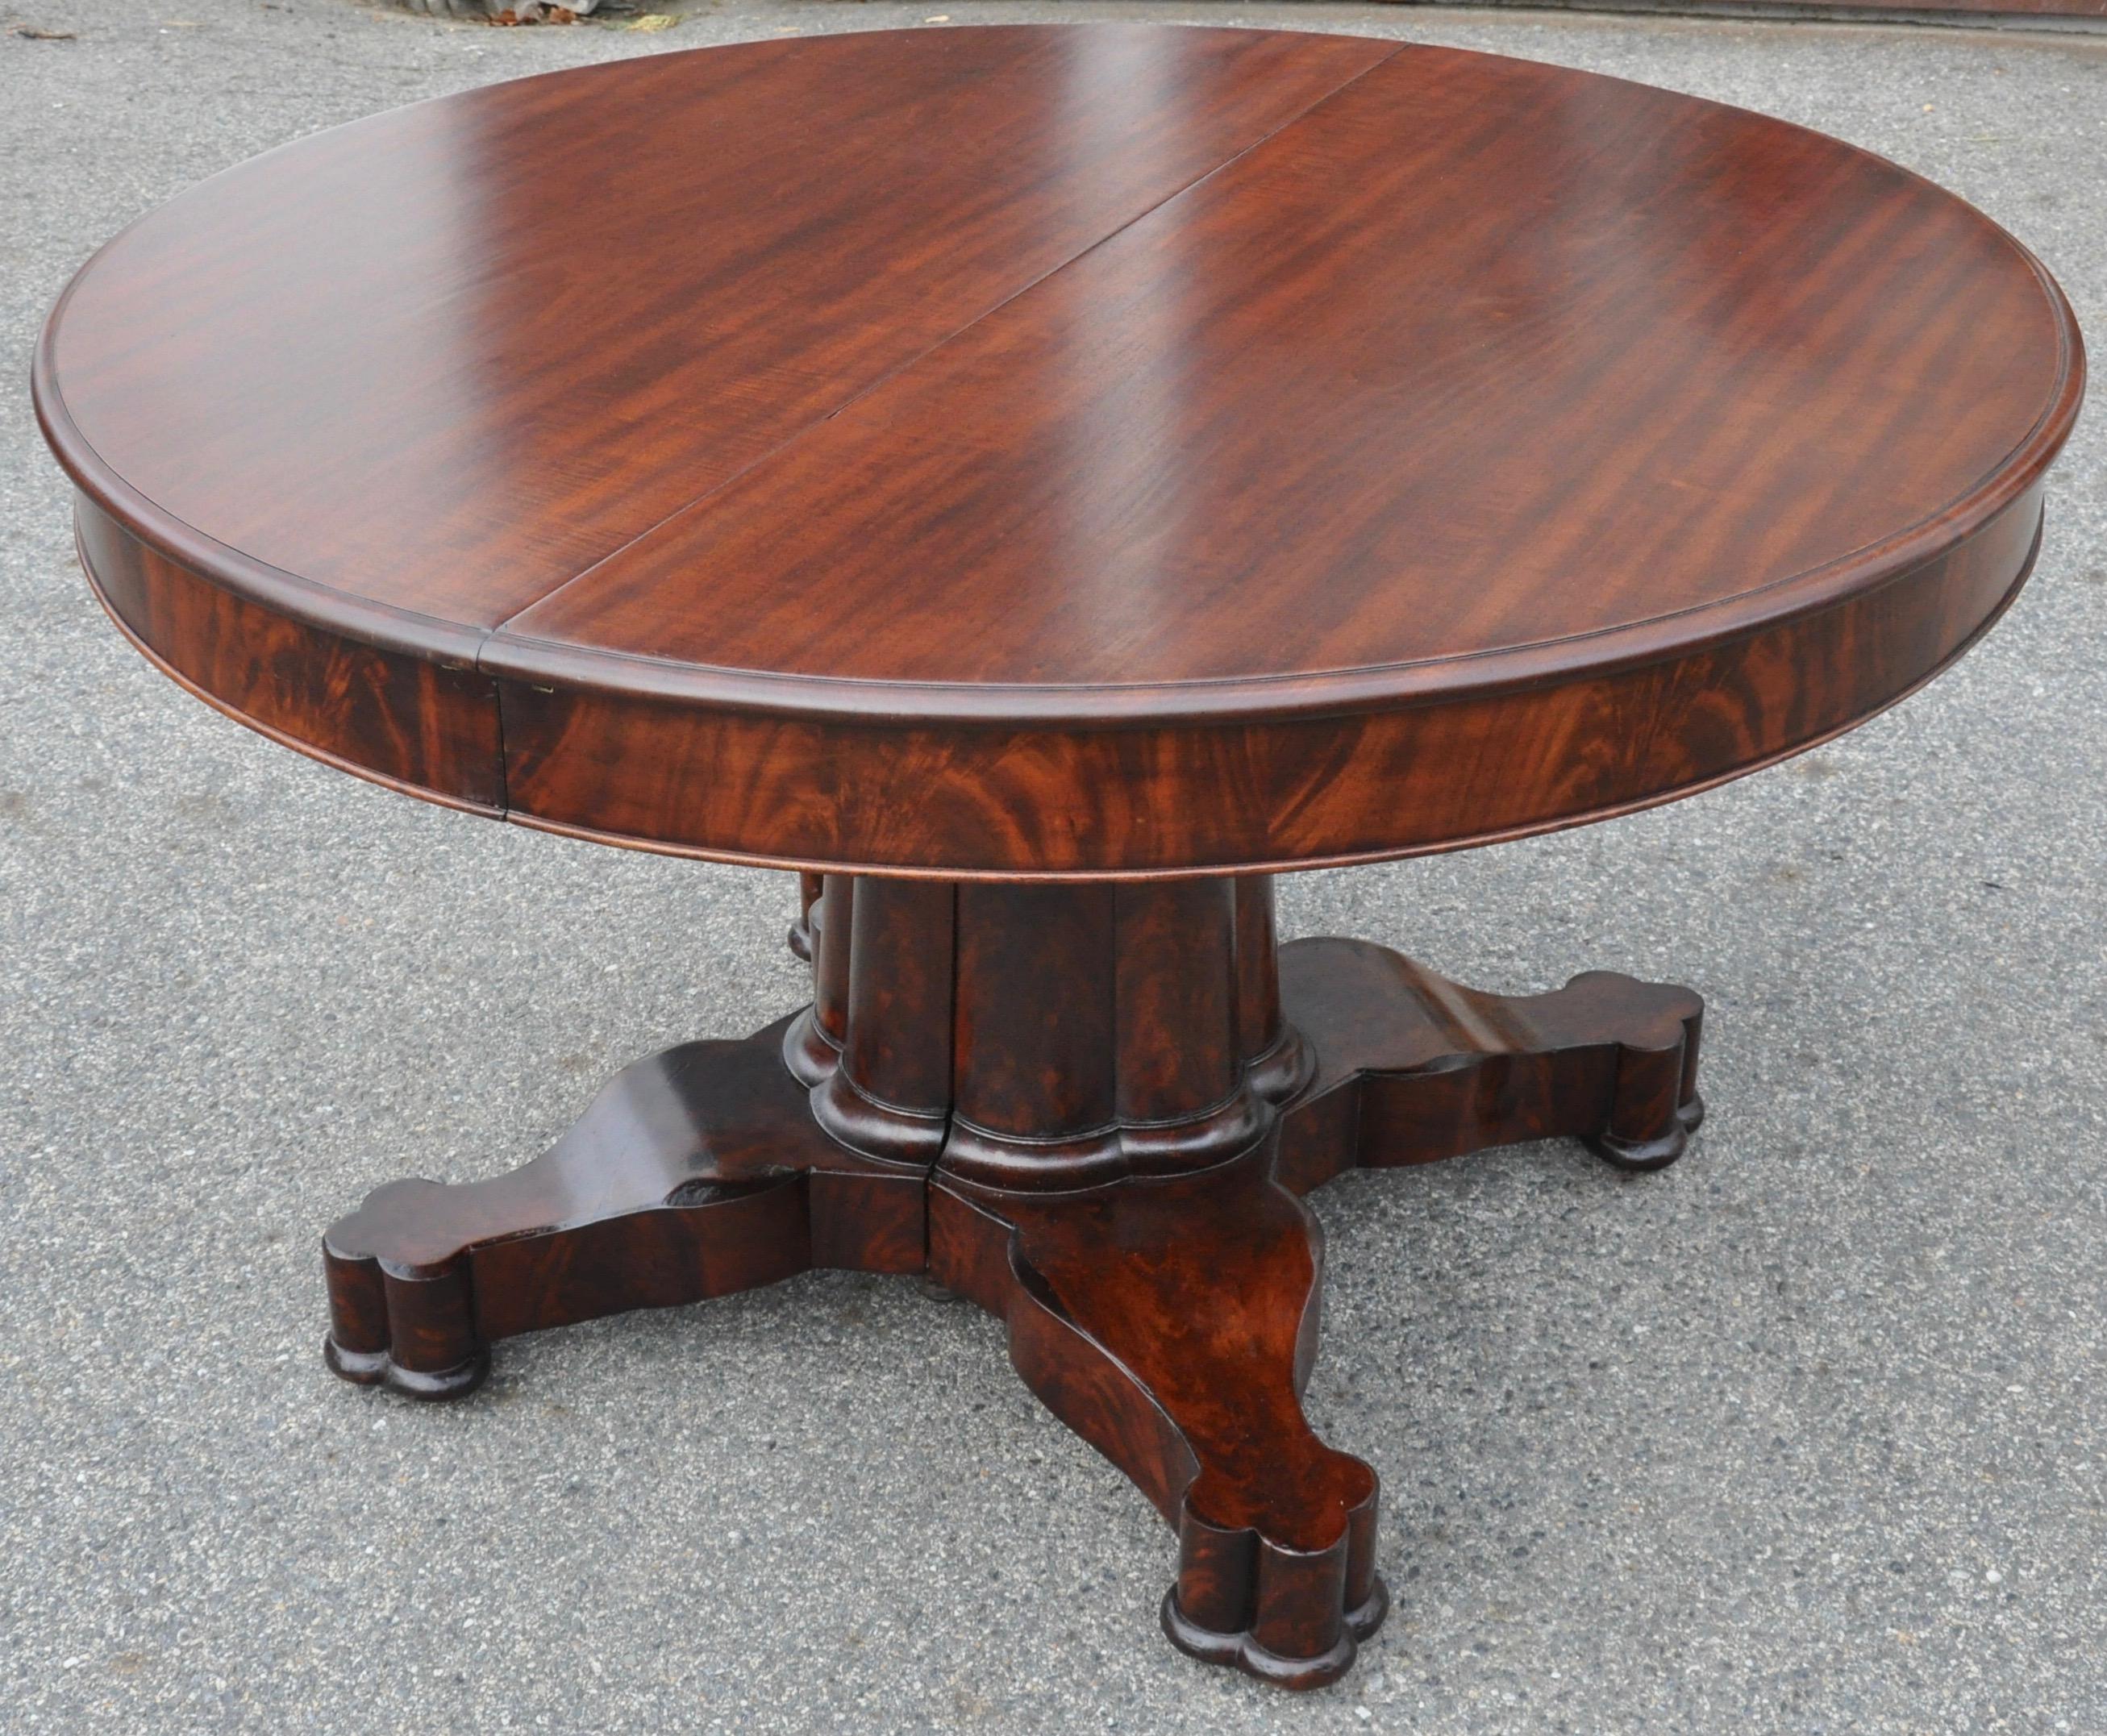 Period New York Classical Empire dining table with four leaves.  Signed by Charles hope, New York

--Crotch Mahogany and solid top boards.
--Composite Gothic column base with splits in extension.
--Four clover ended feet
--Leaves are